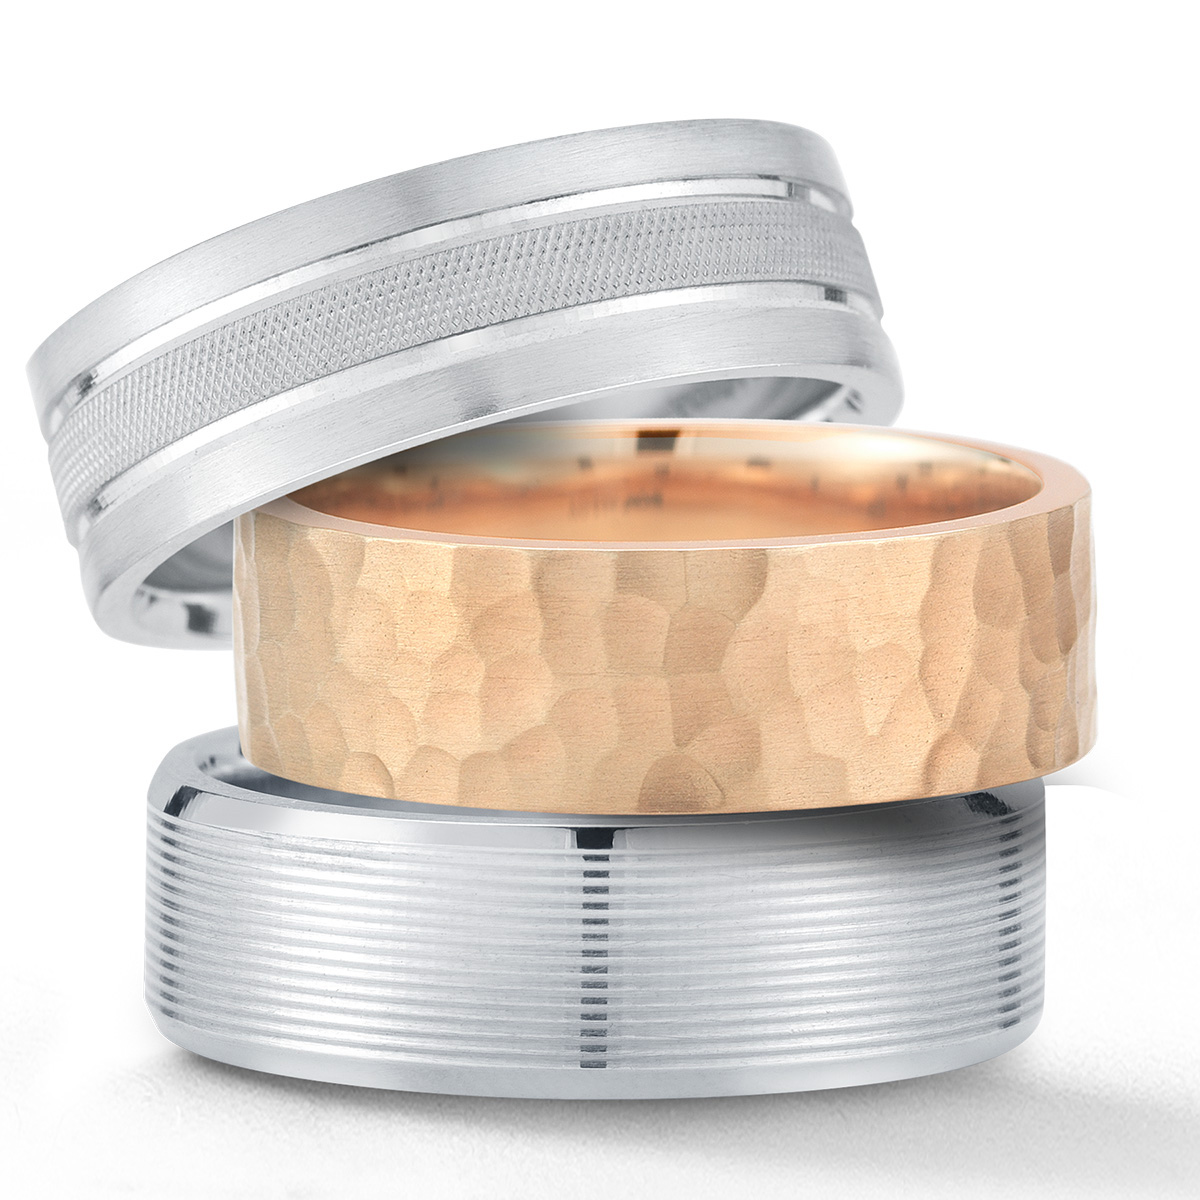 Wedding bands available at Diamonds Direct in Salt Lake City.